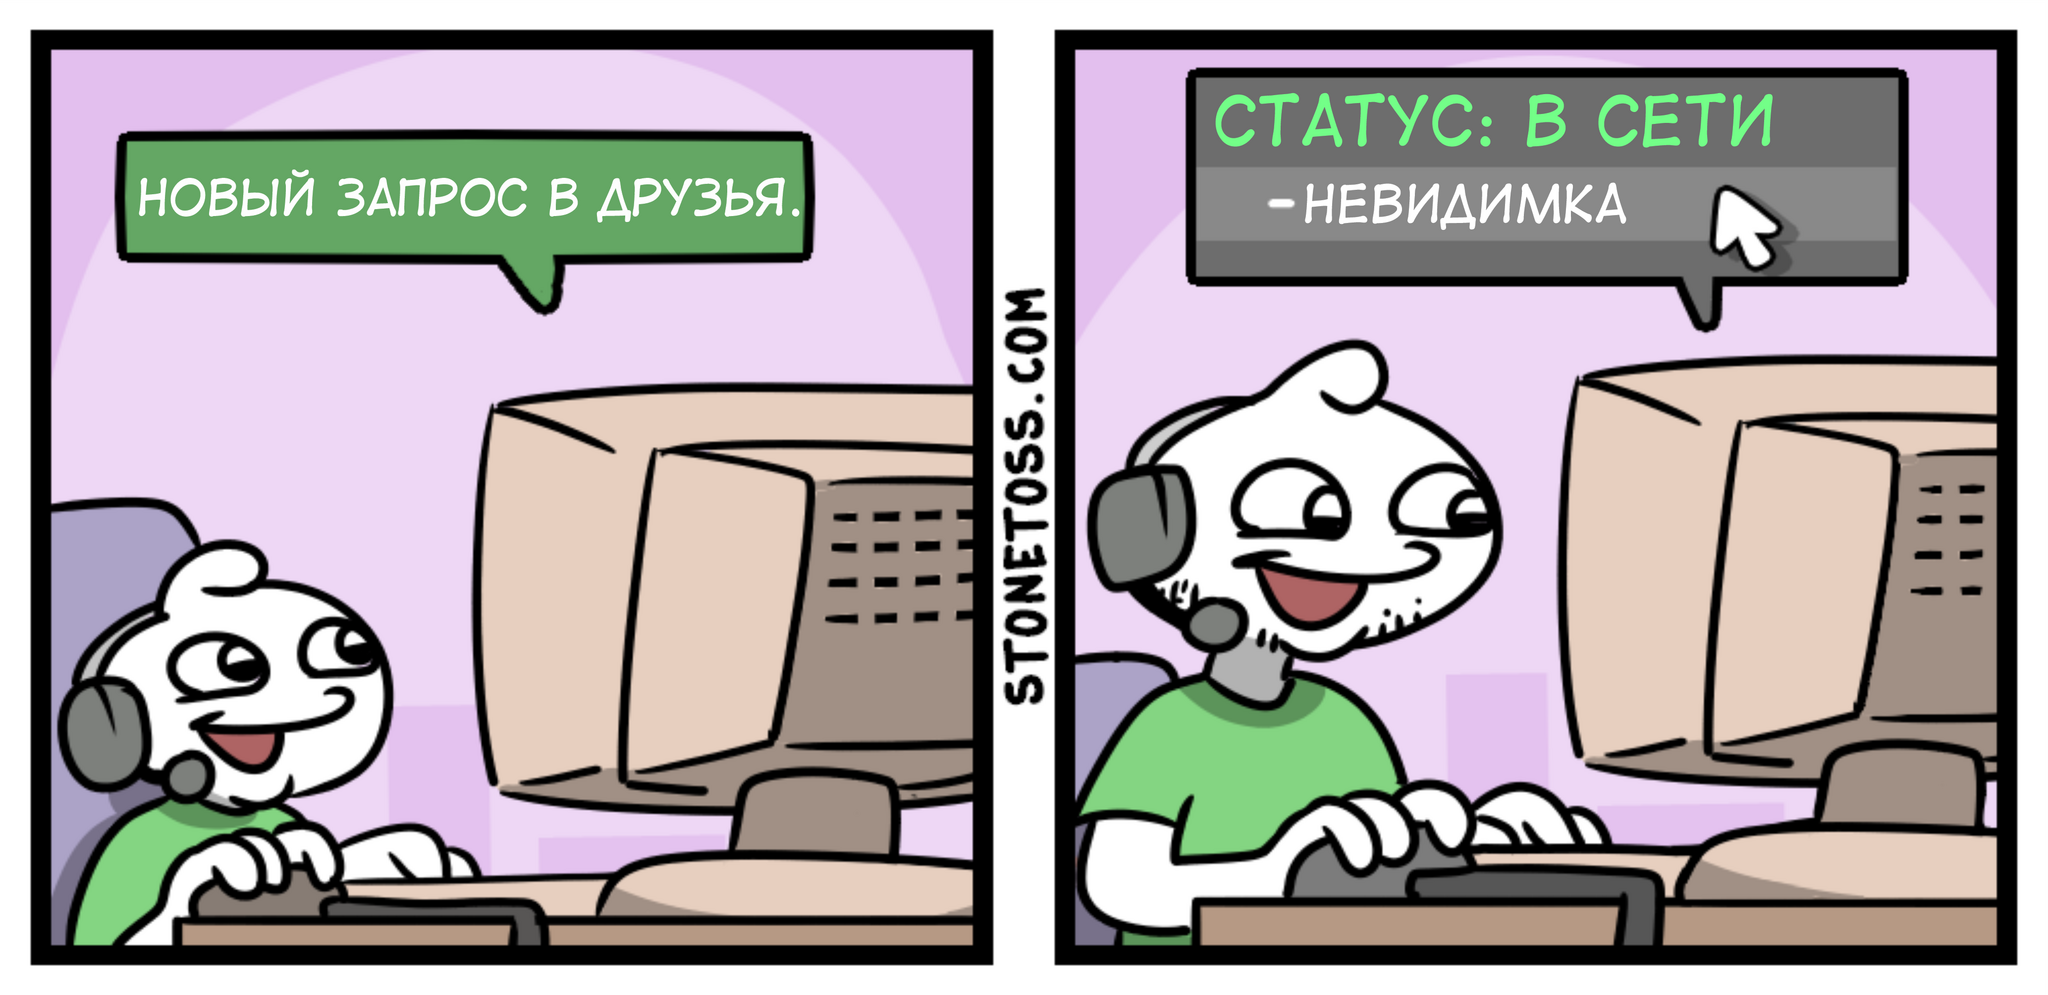 Single player - Stonetoss, Humor, Comics, Translation, Translated by myself, Picture with text, Steam, Web comic, Friends, Sad humor